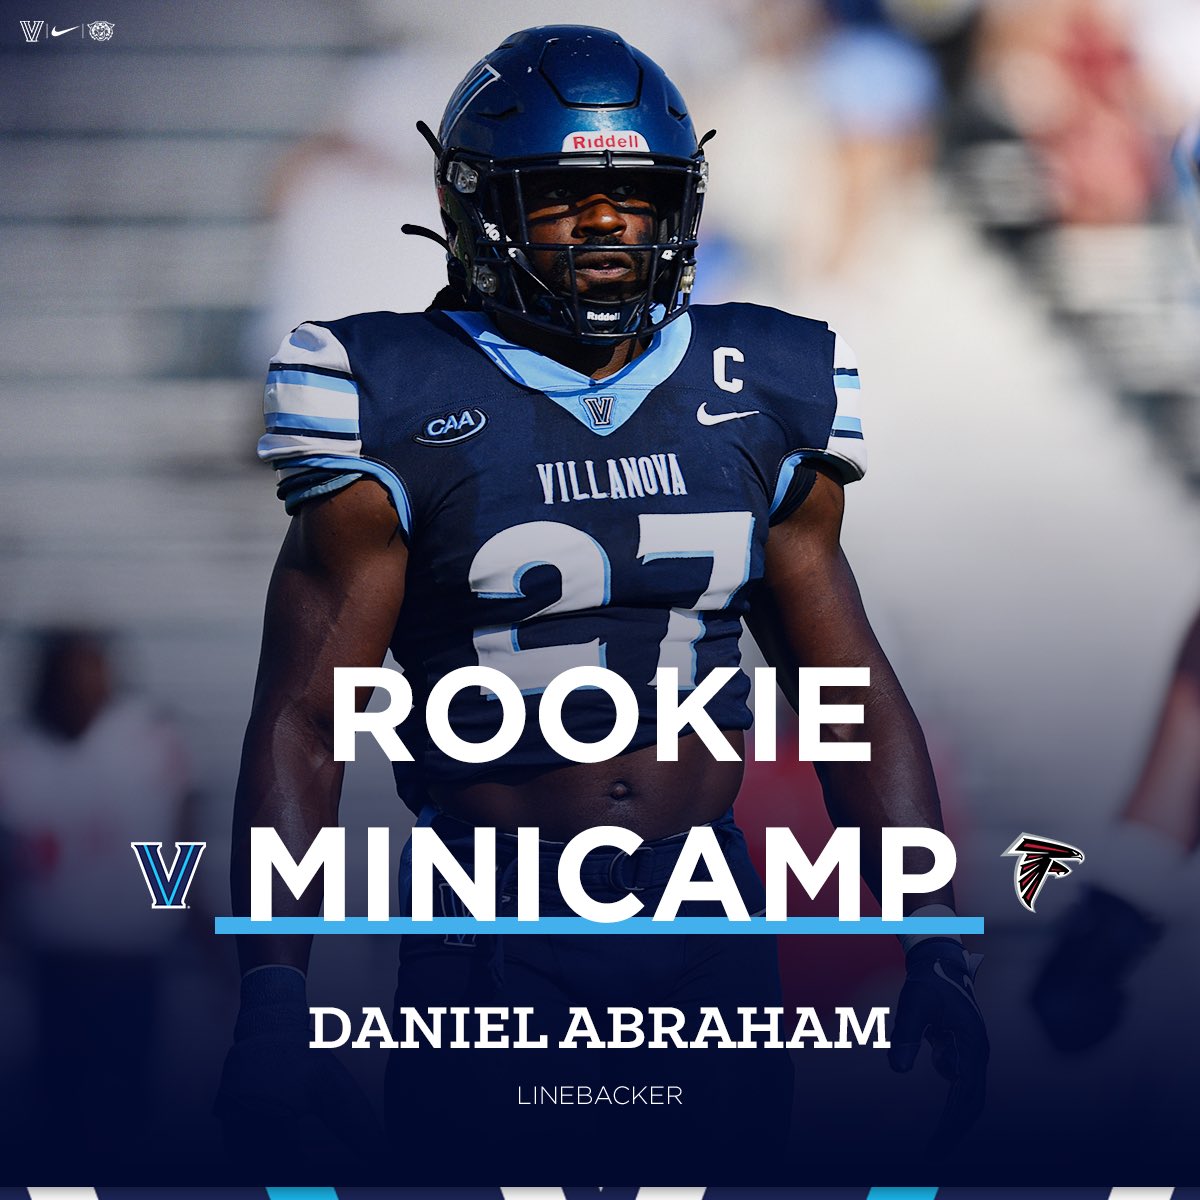 .@Country_TheBig has been invited to the @AtlantaFalcons Rookie Minicamp! ✌️ #TapTheRock #CatsintheNFL